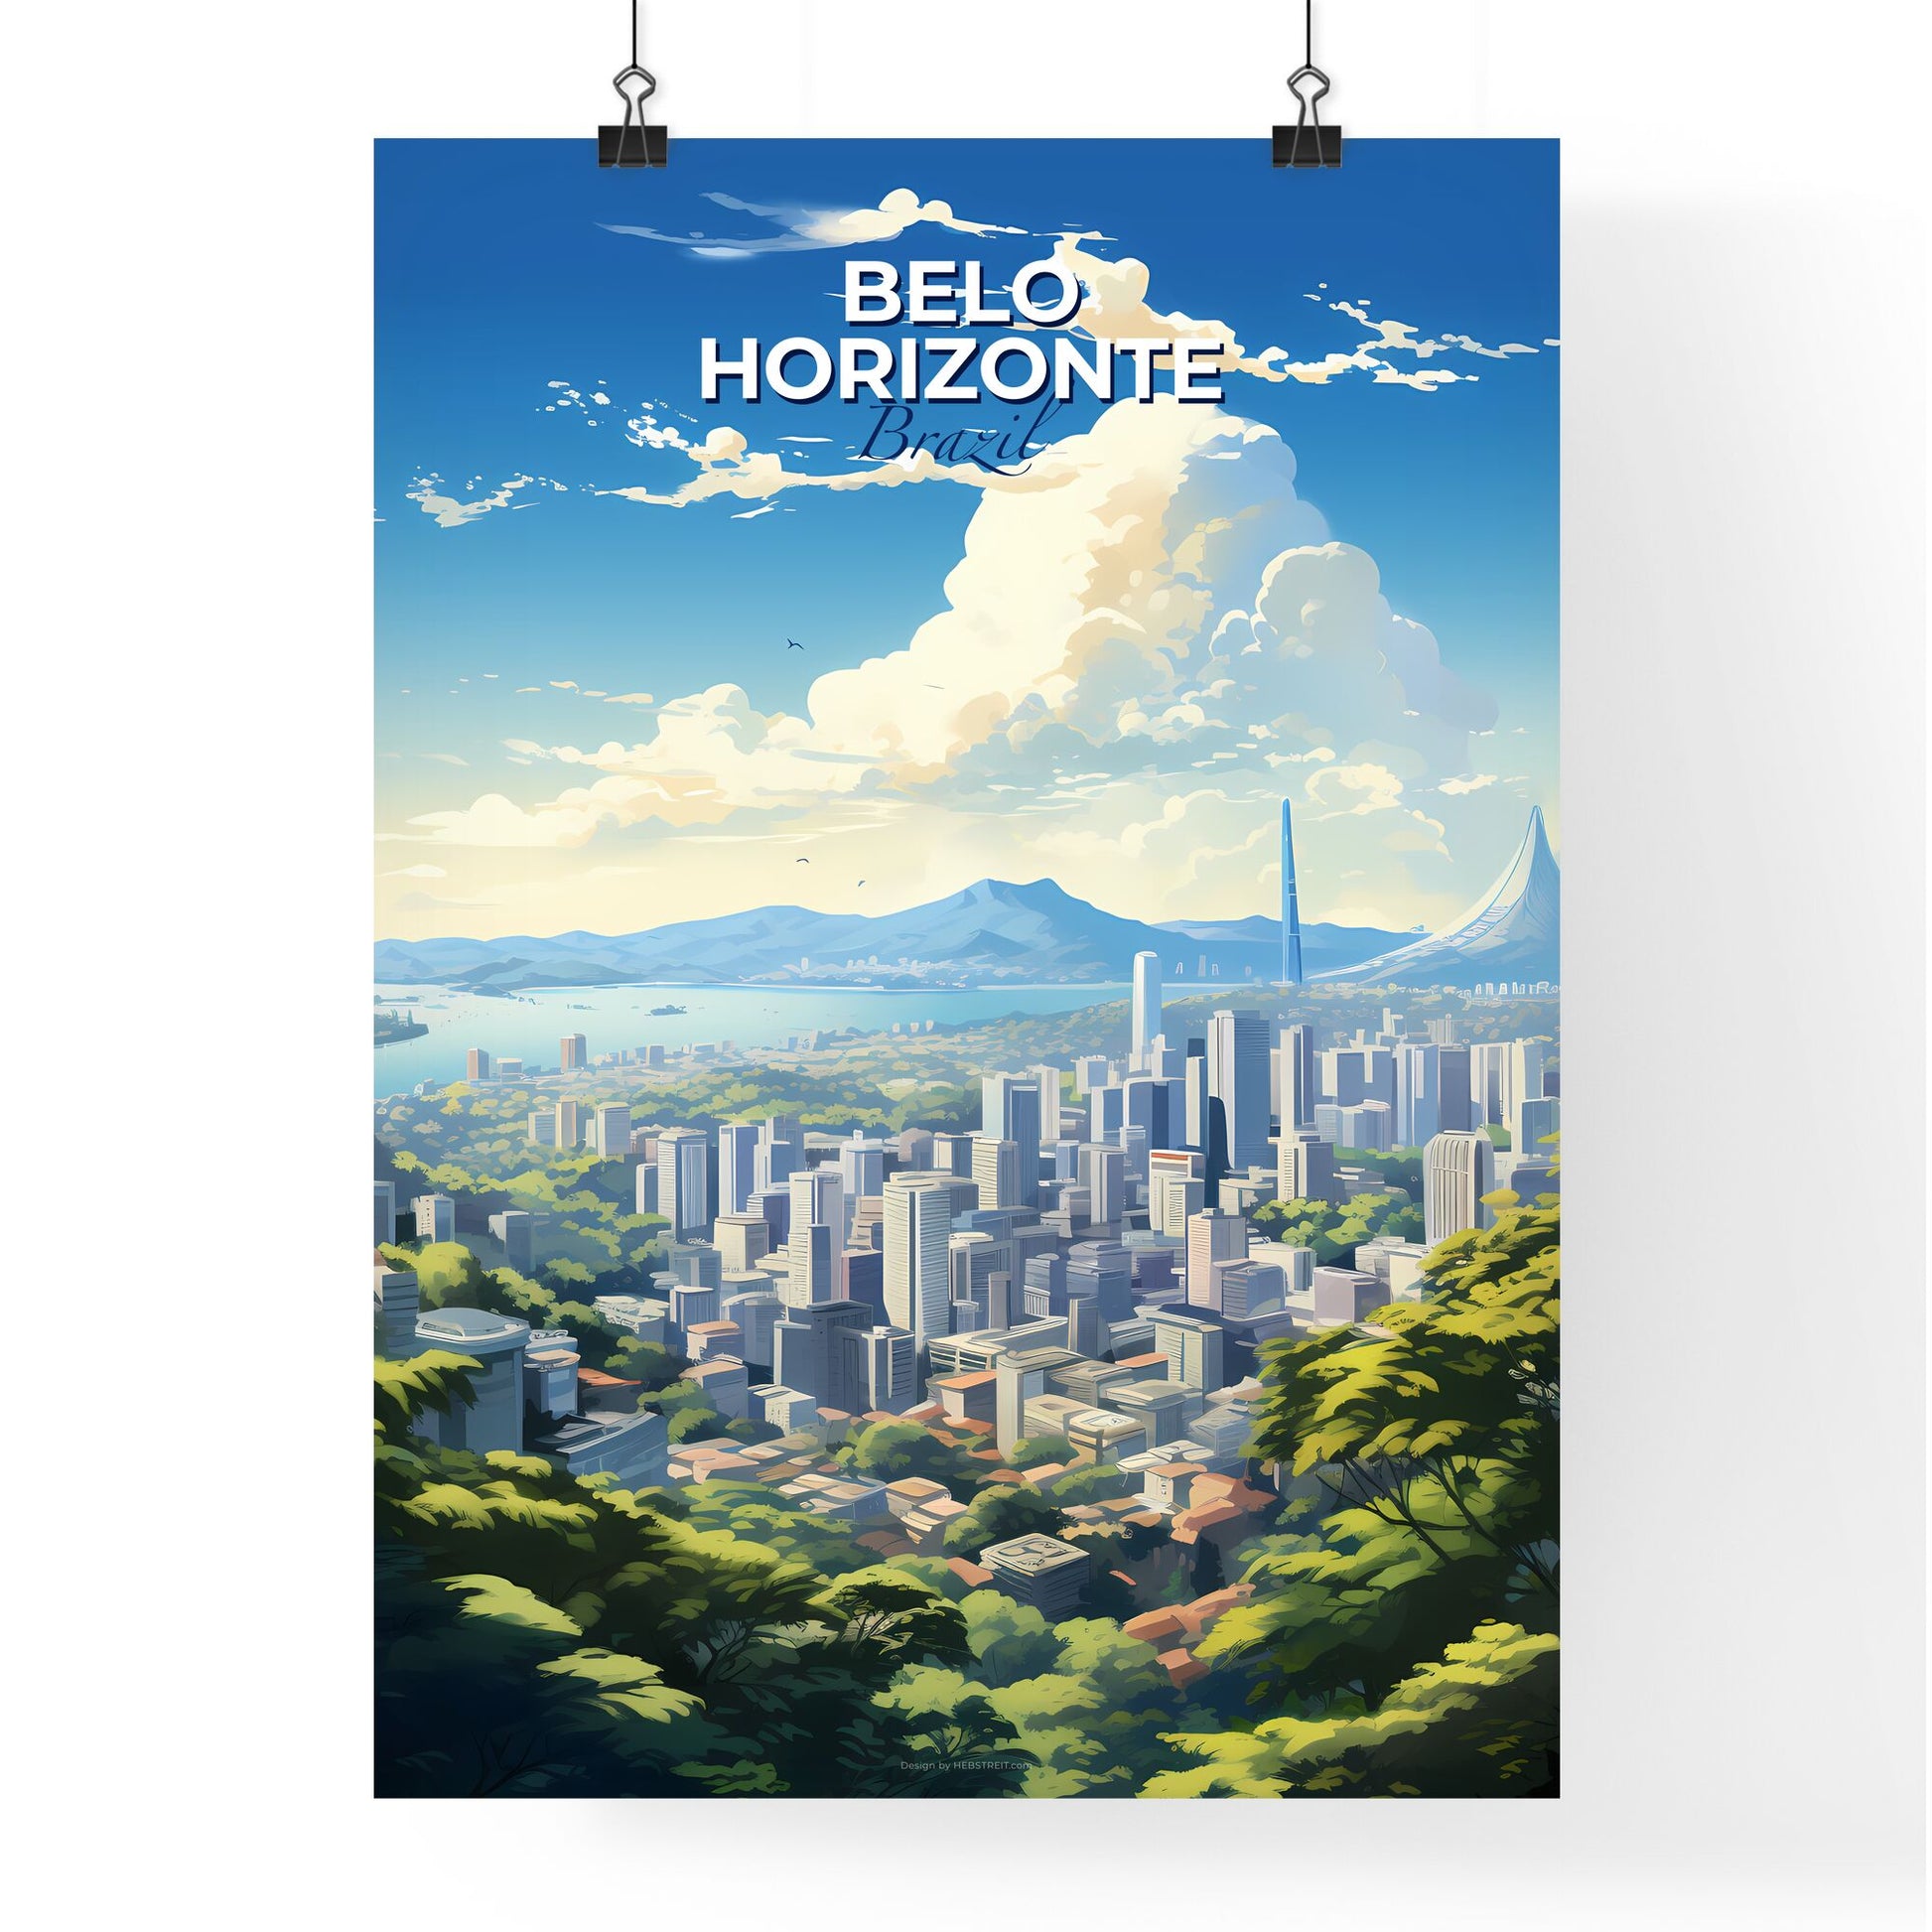 Belo Horizonte Brazil Skyline - A Cityscape With Trees And Mountains - Customizable Travel Gift Default Title